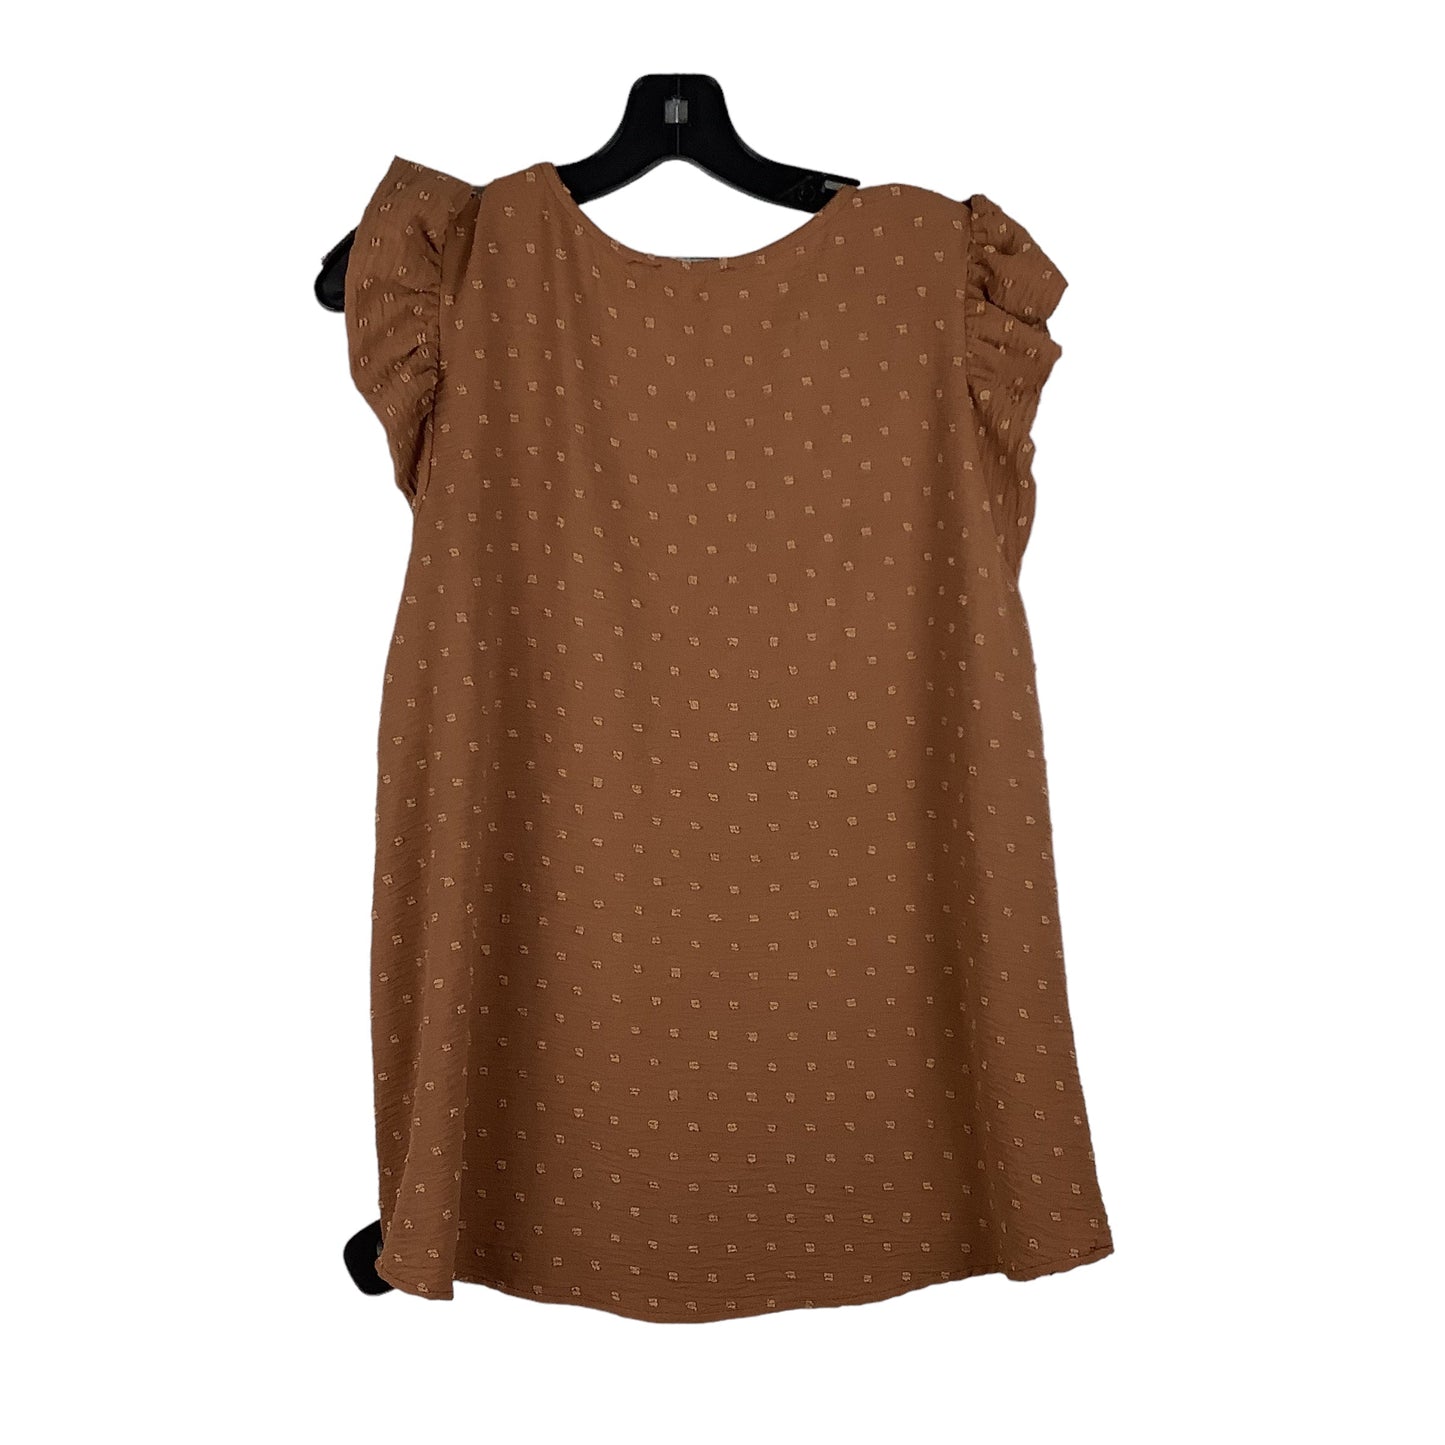 Brown Top Short Sleeve Clothes Mentor, Size L